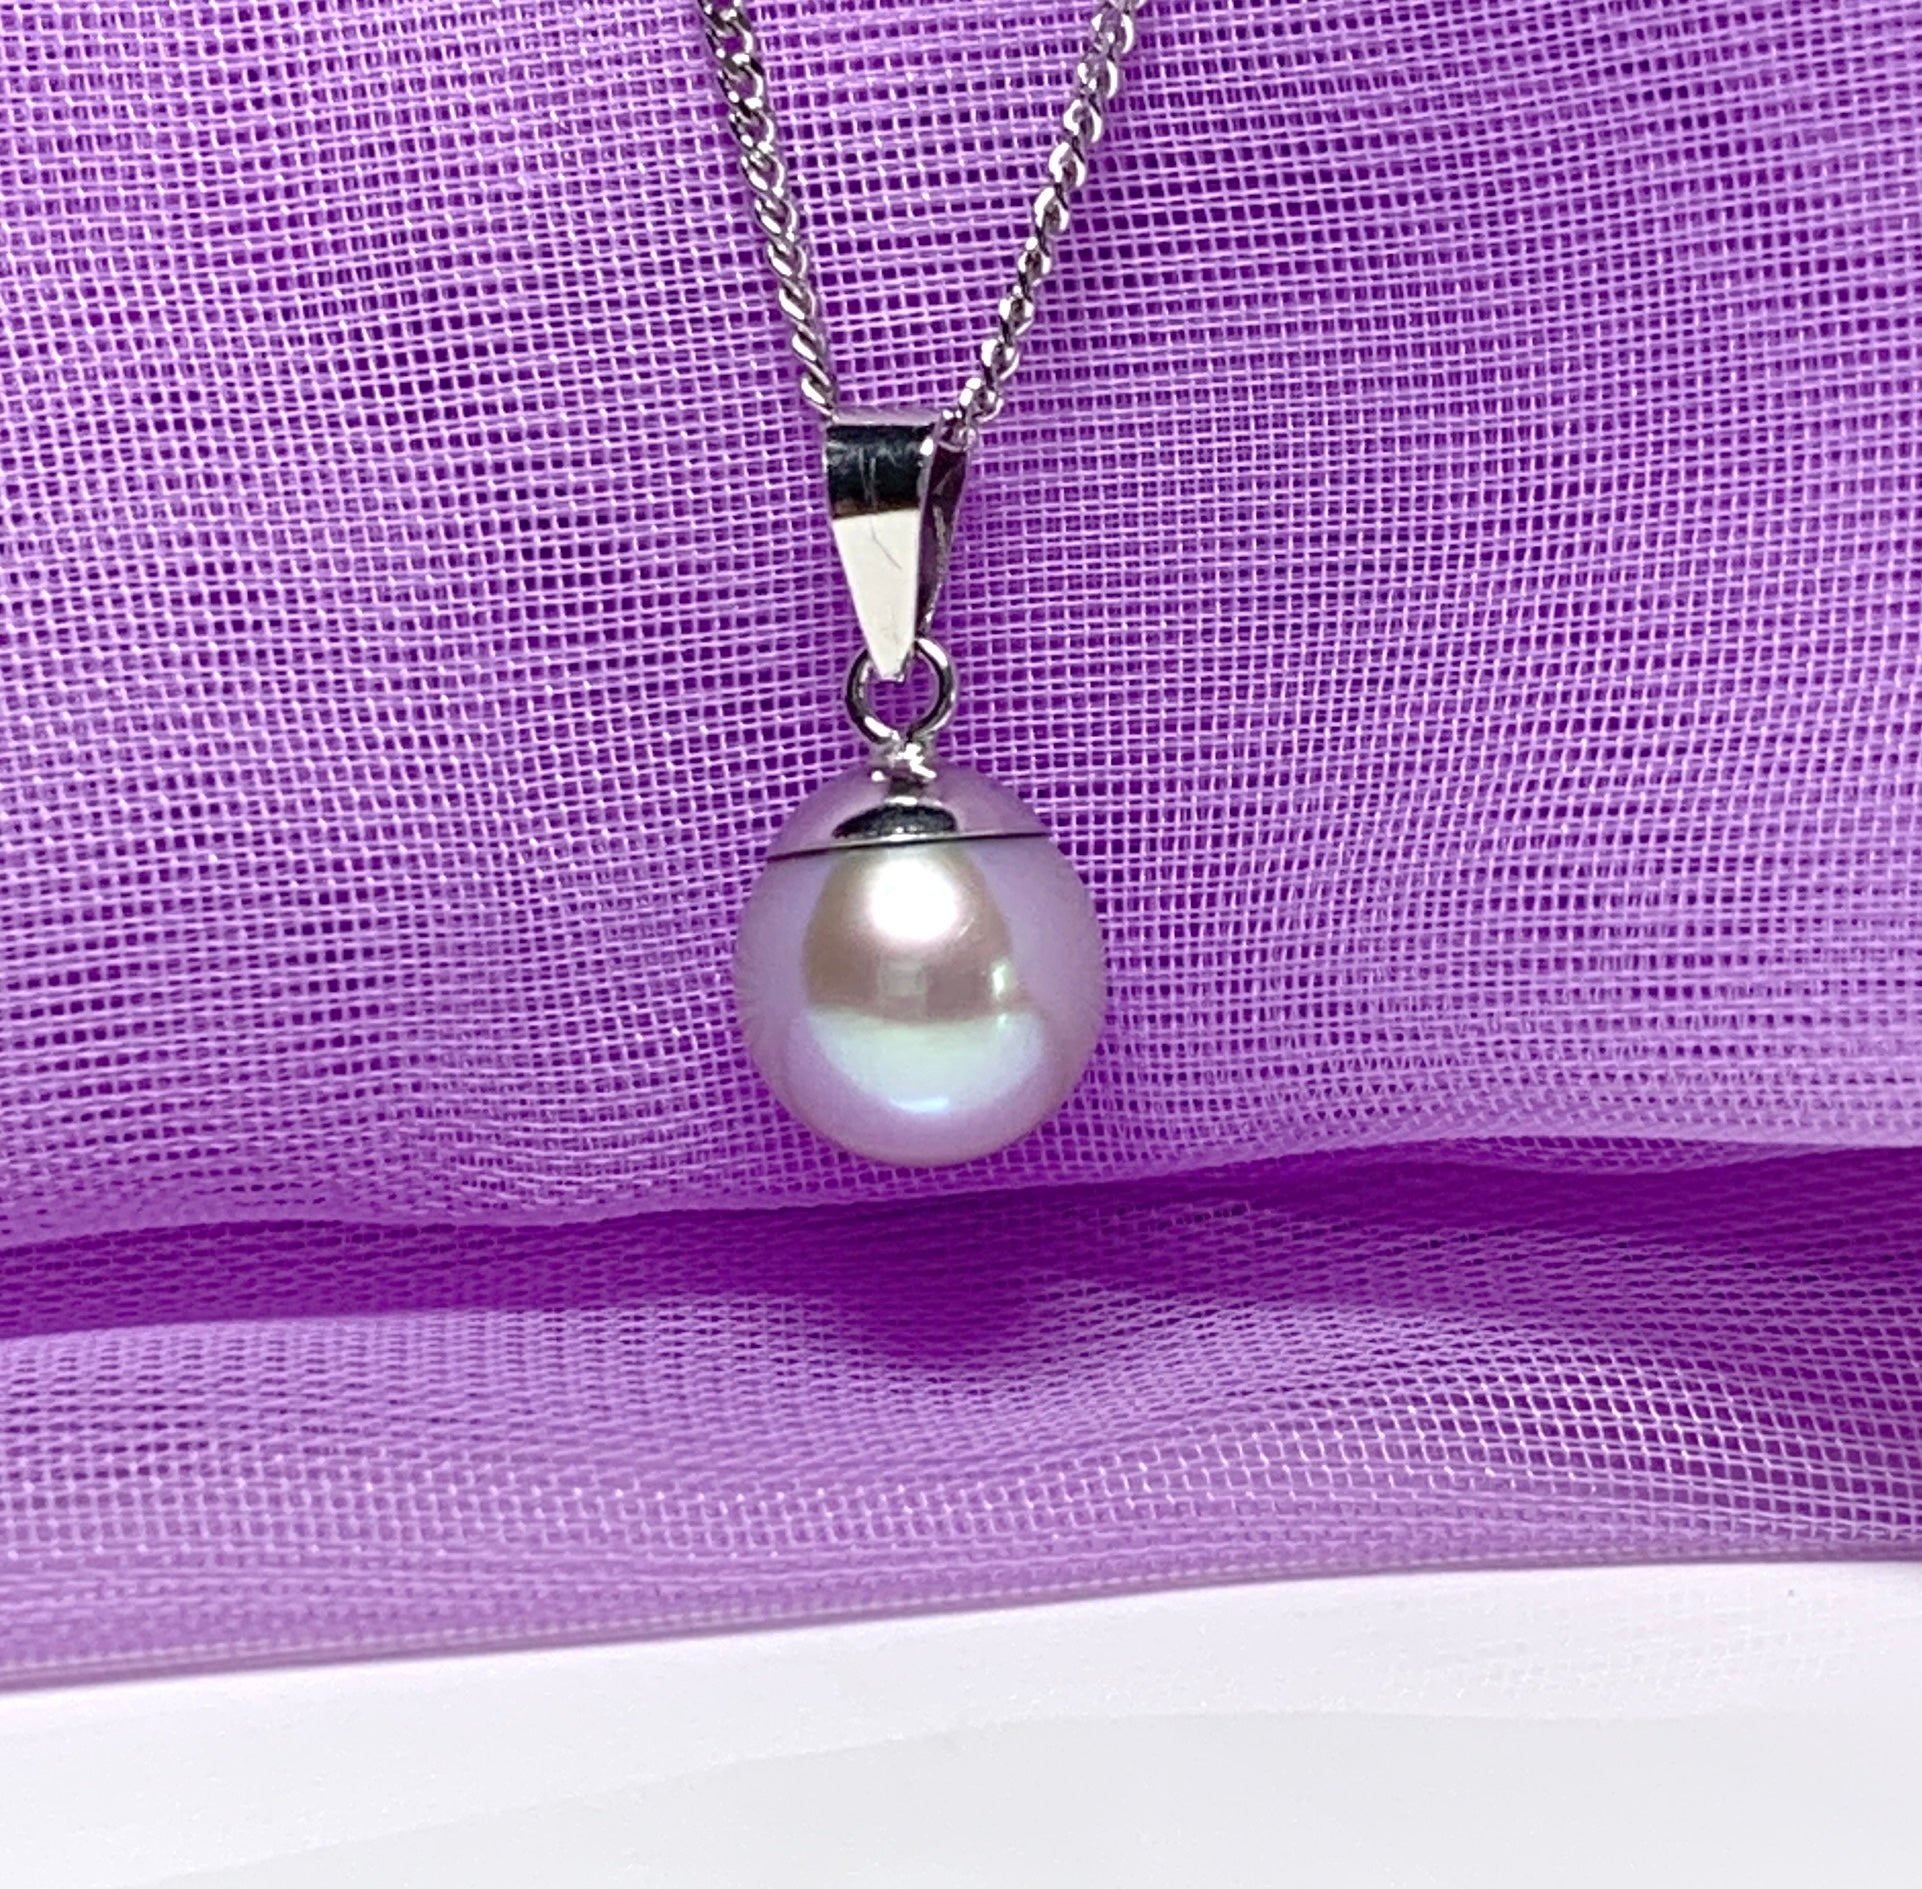 White gold round light grey freshwater cultured pearl necklace pendant